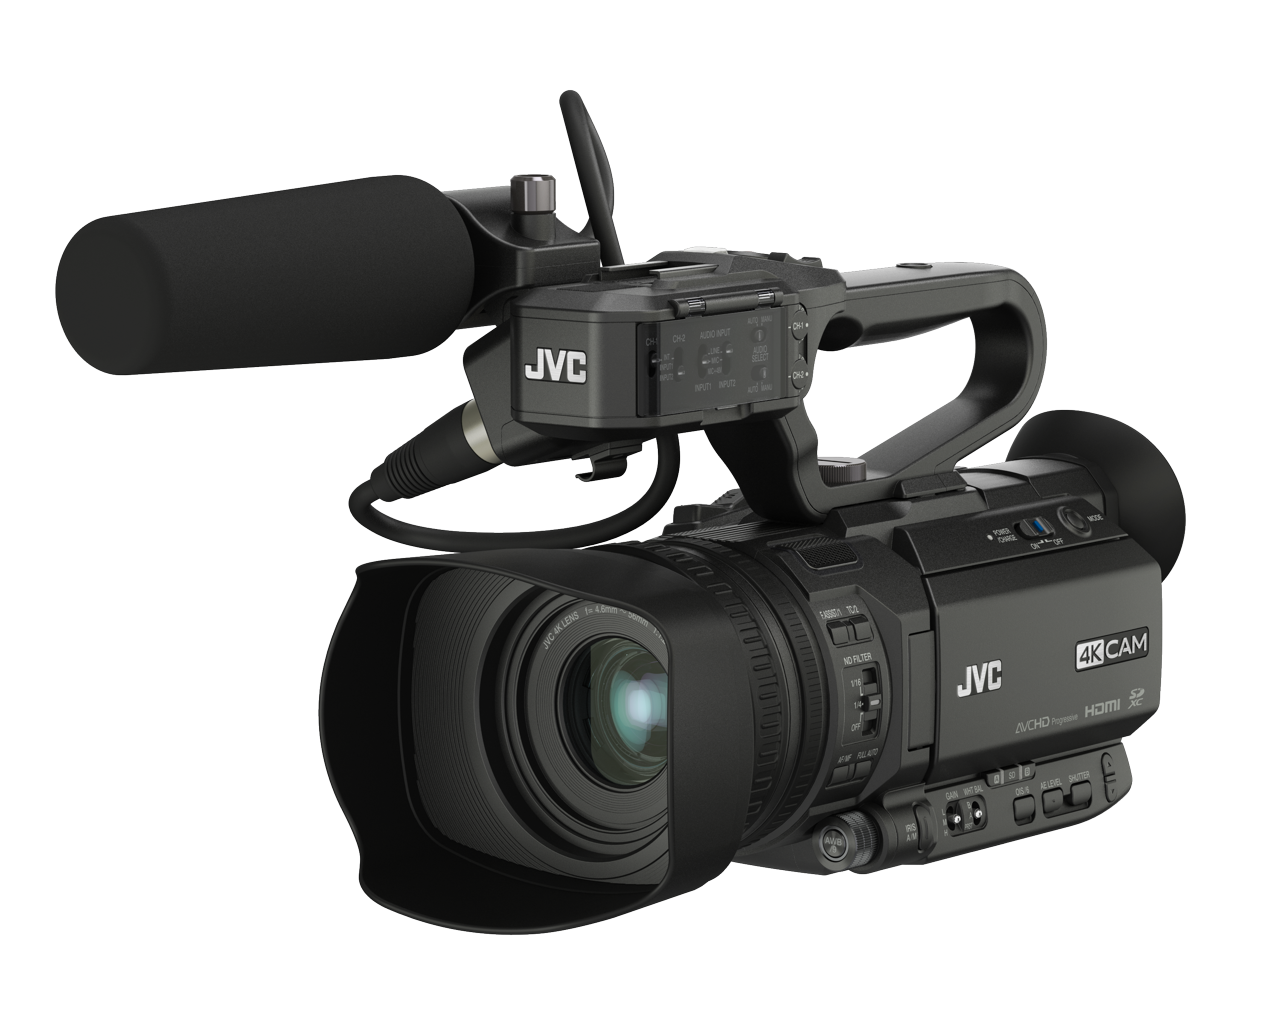 JVC GY-HM180E Solid State Ip 4k/Hd Camcorder, Handheld With Hd-Sdi(3g) Output